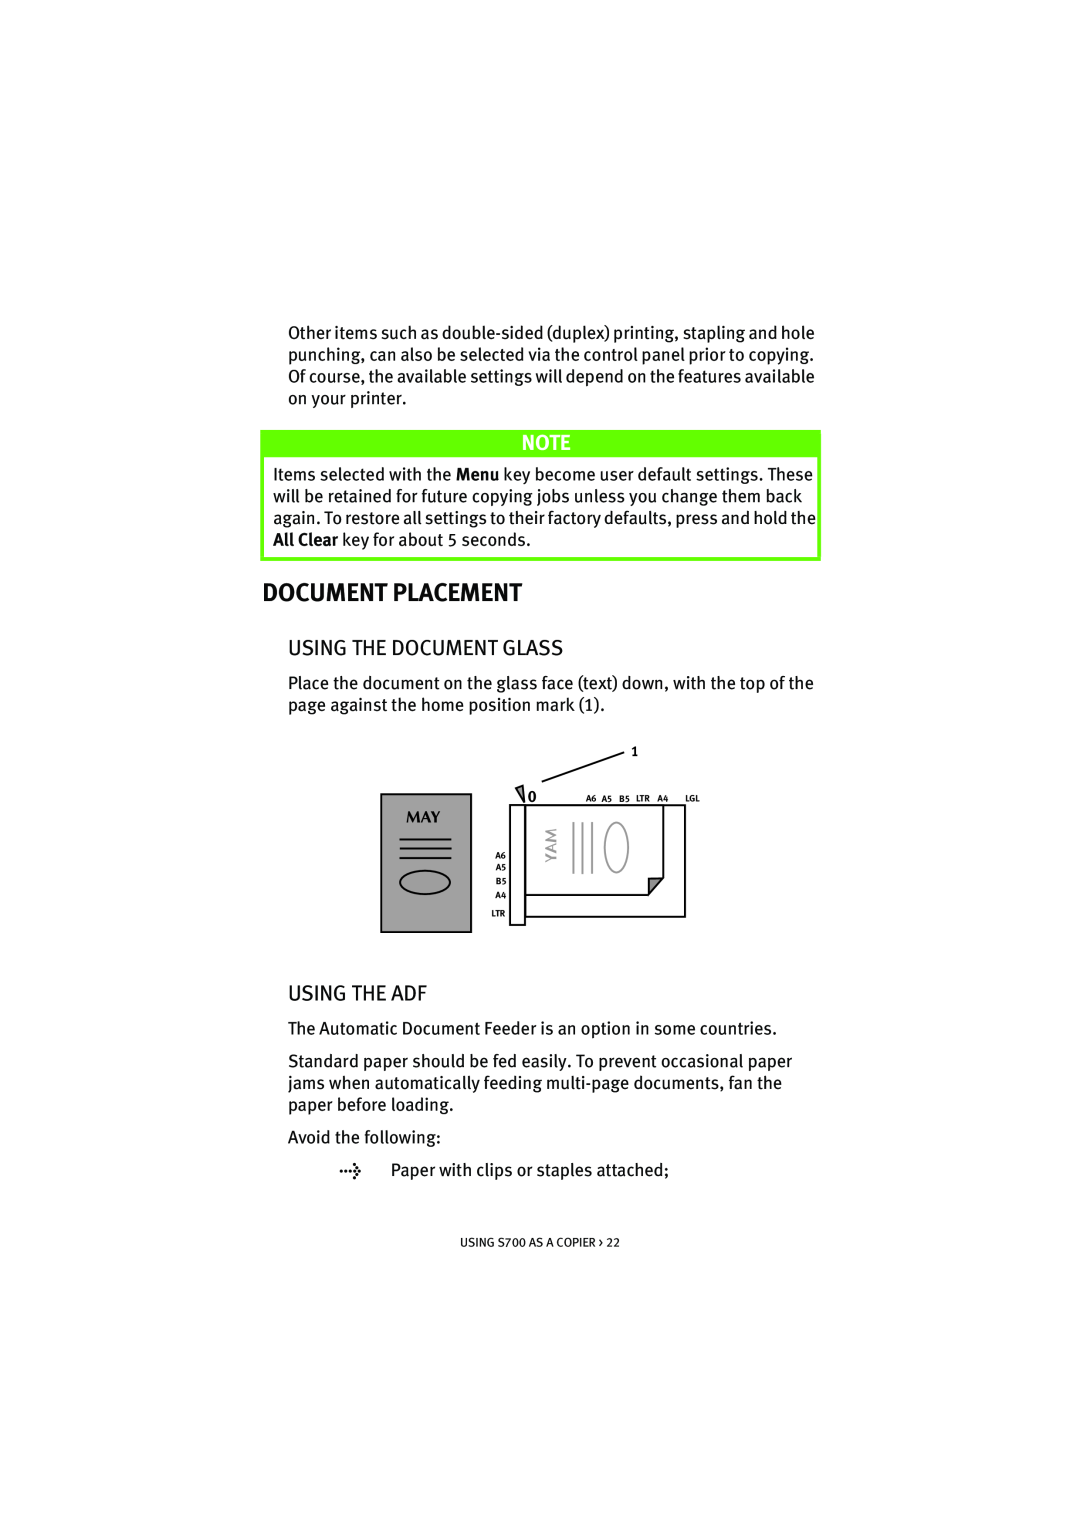 Oki S700 manual Document Placement, Using The Document Glass, Using The Adf 